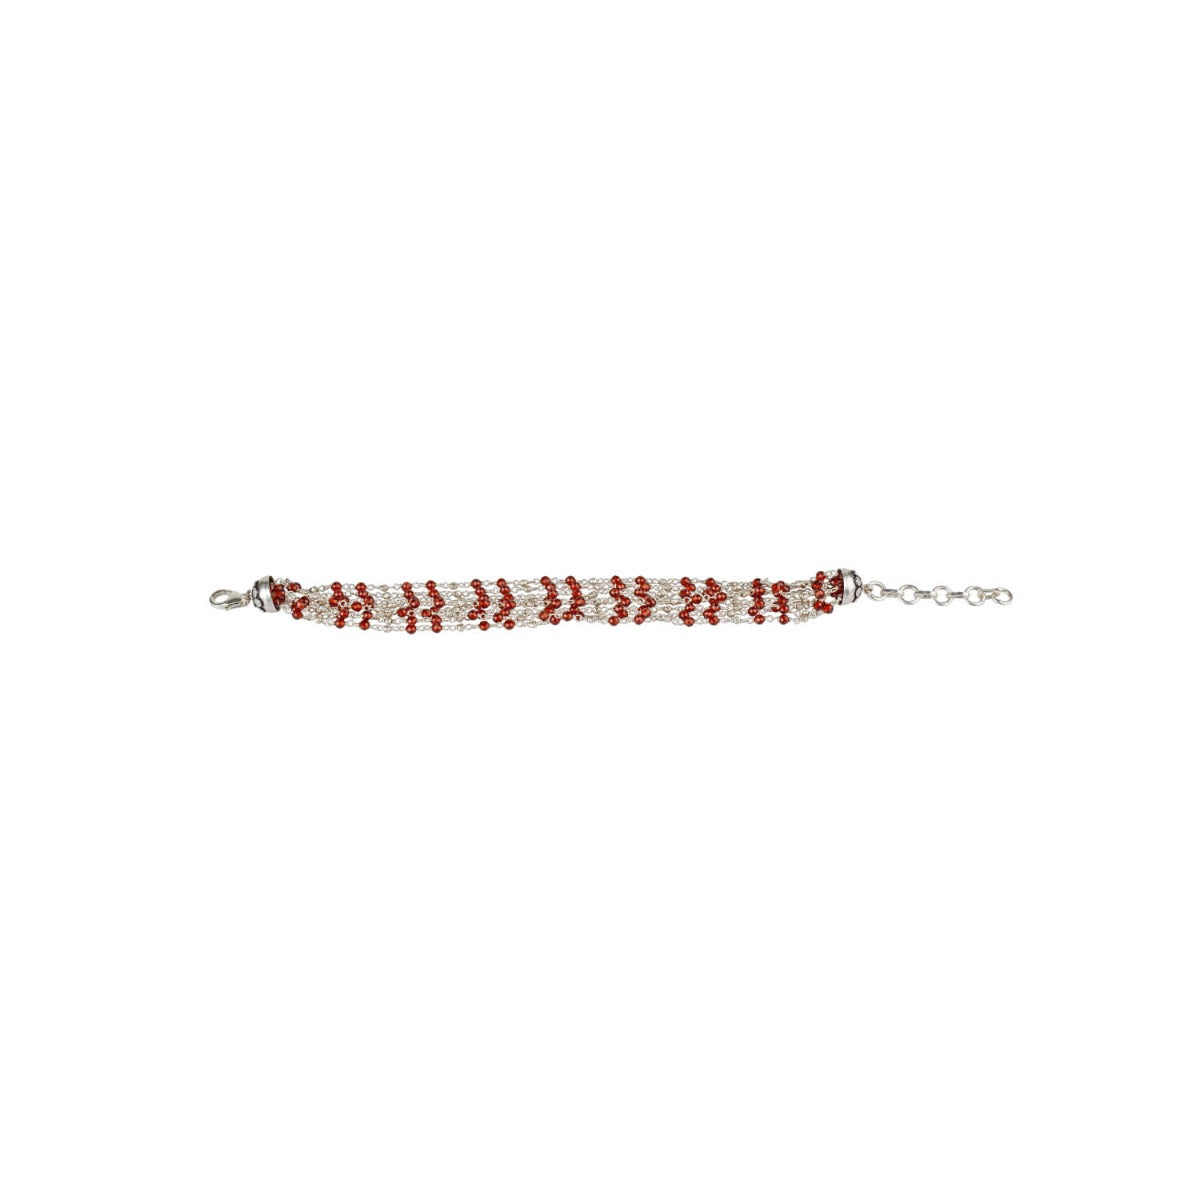 Magnificent Garnet Beads and Silver 925 Bracelet